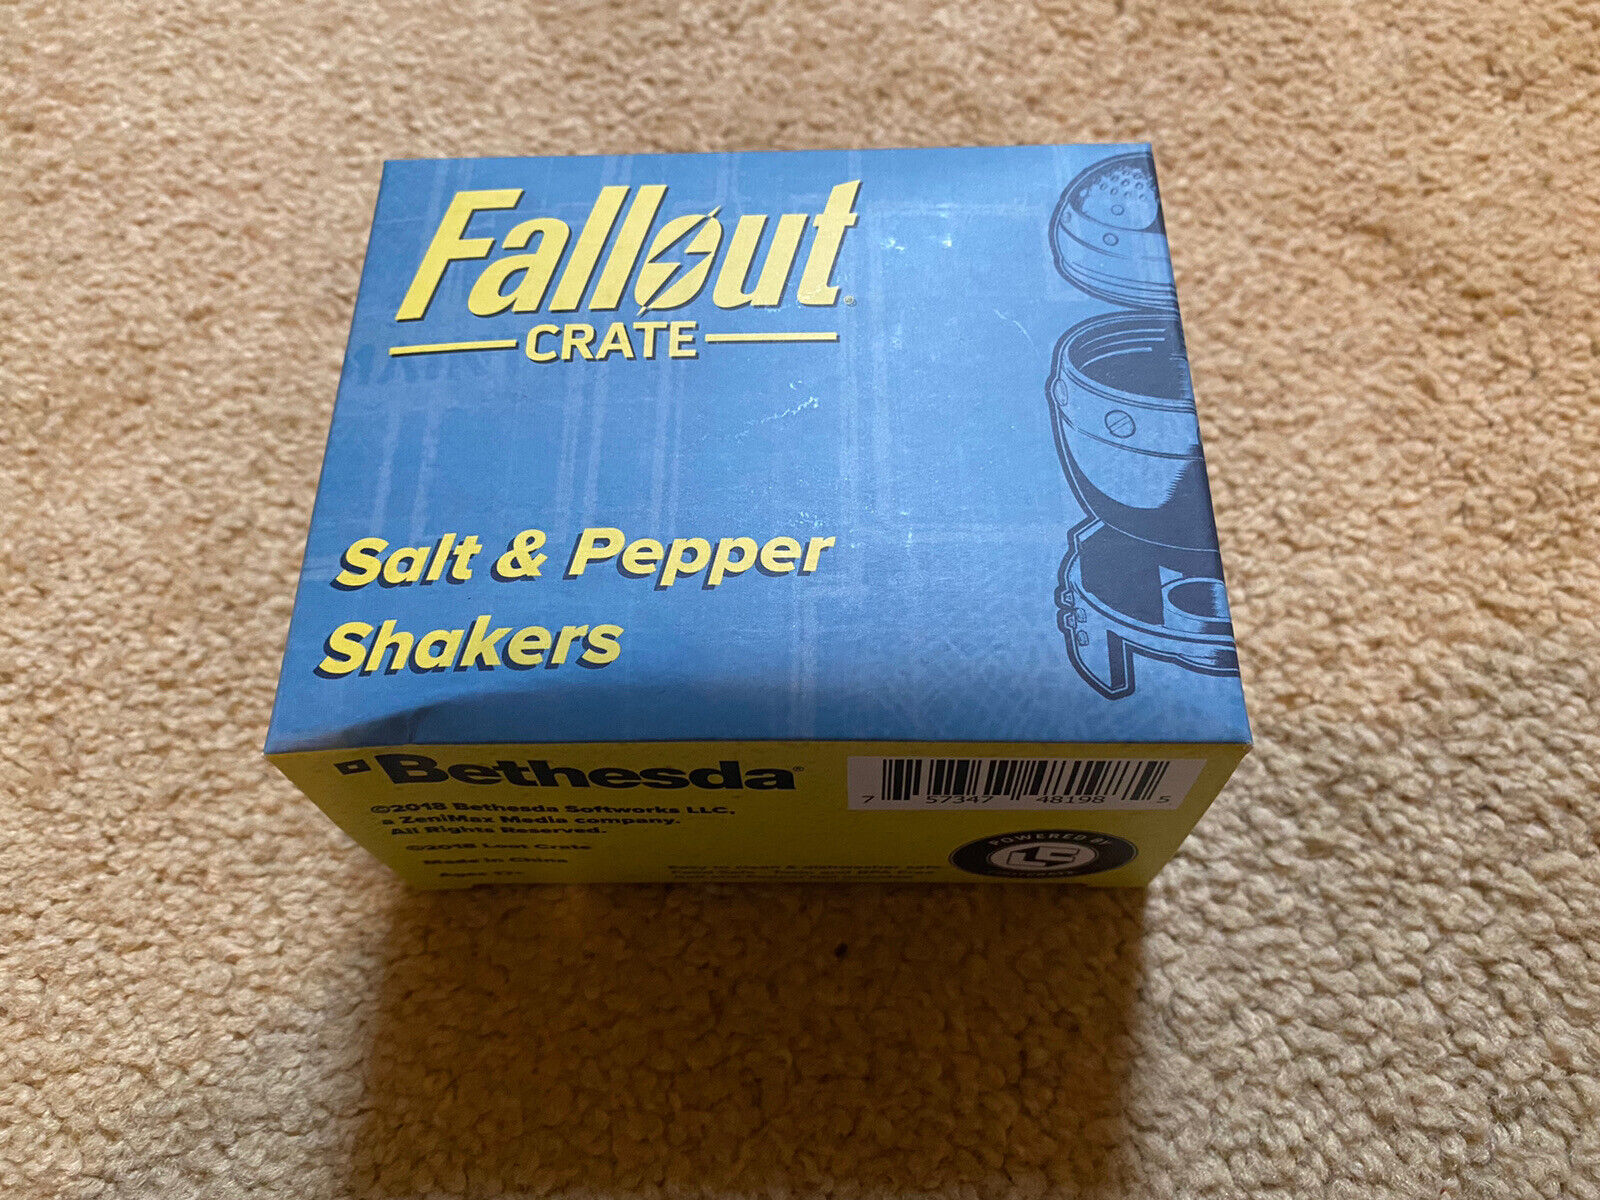 Fallout Crate Mini Nukes Salt & Pepper Shakers Loot Crate Exclusive Rare Sealed